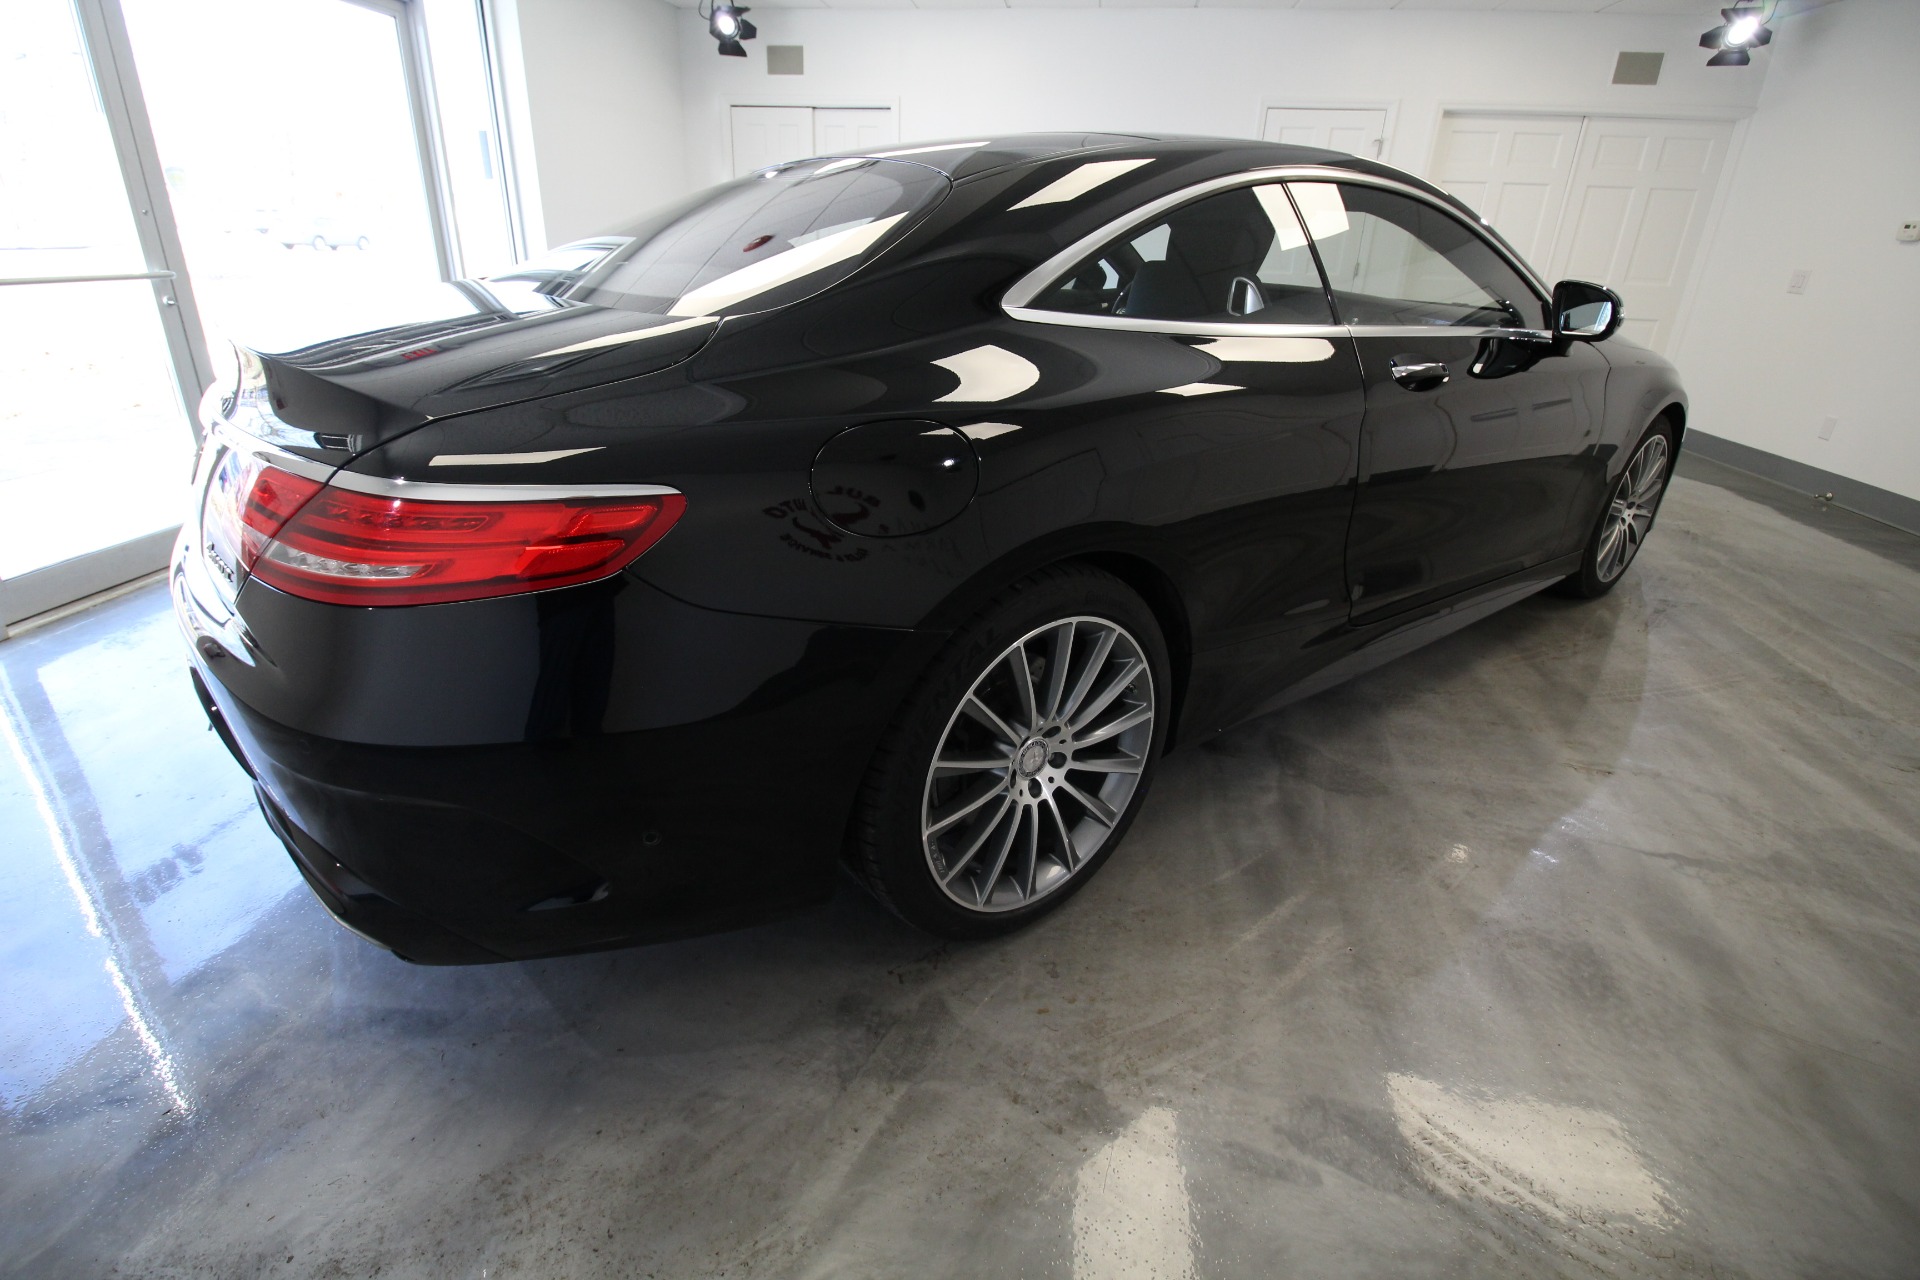 Used 2016 Black Mercedes-Benz S-Class S550 4MATIC COUPE SUPERB INSIDE AND OUT LOW MILES LOCAL CAR | Albany, NY